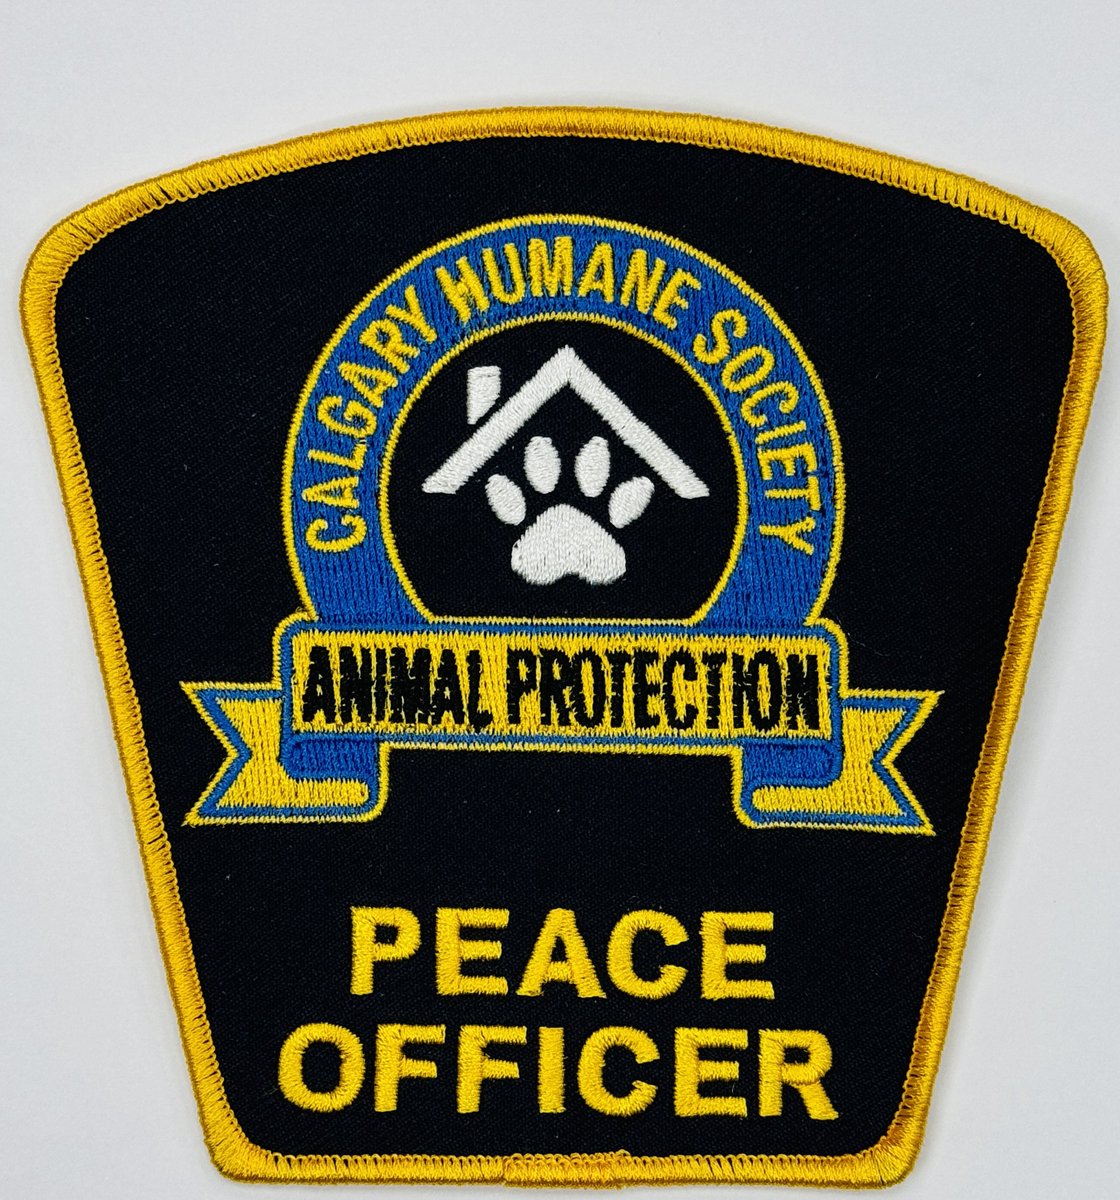 Welcome to Calgary Humane Society's Animal Protection and Investigations' 4th annual Social Media Takeover!  Q&A on this post will be moderated all day.  Let those questions fly!

#AnimalProtection #EndAnimalCruelty #PeaceOfficers #CalgaryHumaneSociety #Q&A